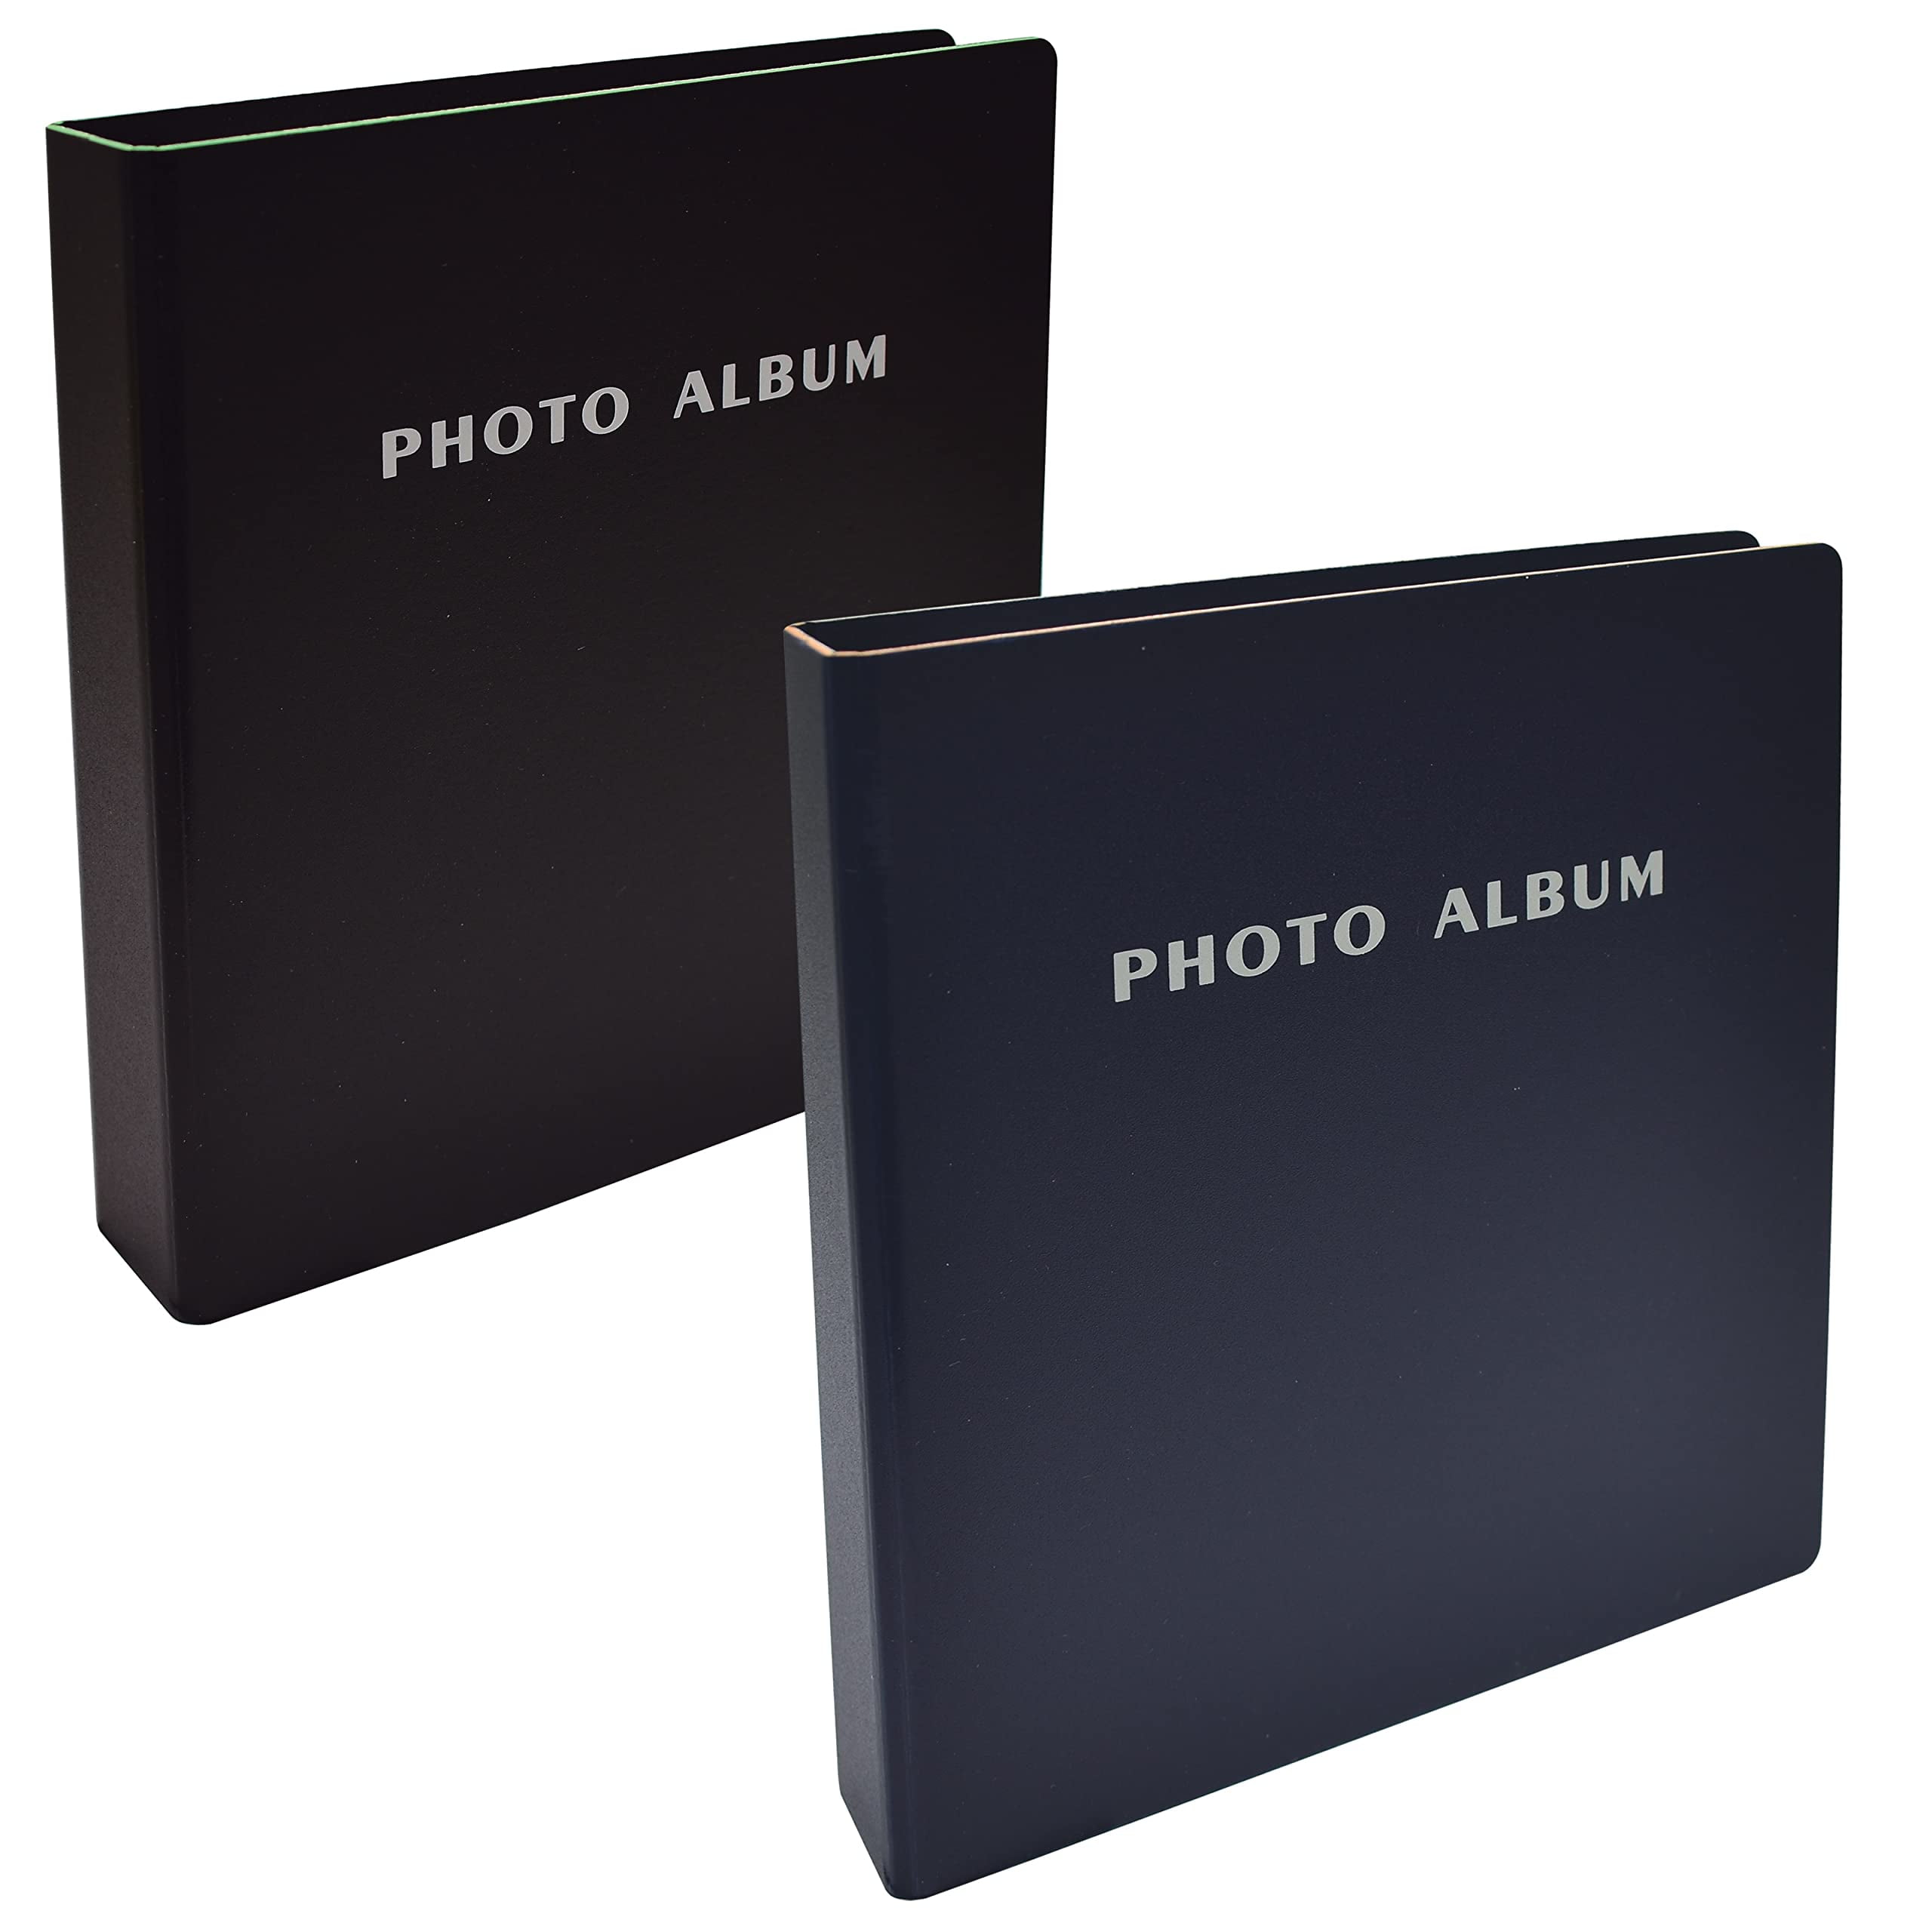 Post-Bound Black pocket album for 5x7 and/or 8x10 prints - Picture Frames,  Photo Albums, Personalized and Engraved Digital Photo Gifts - SendAFrame